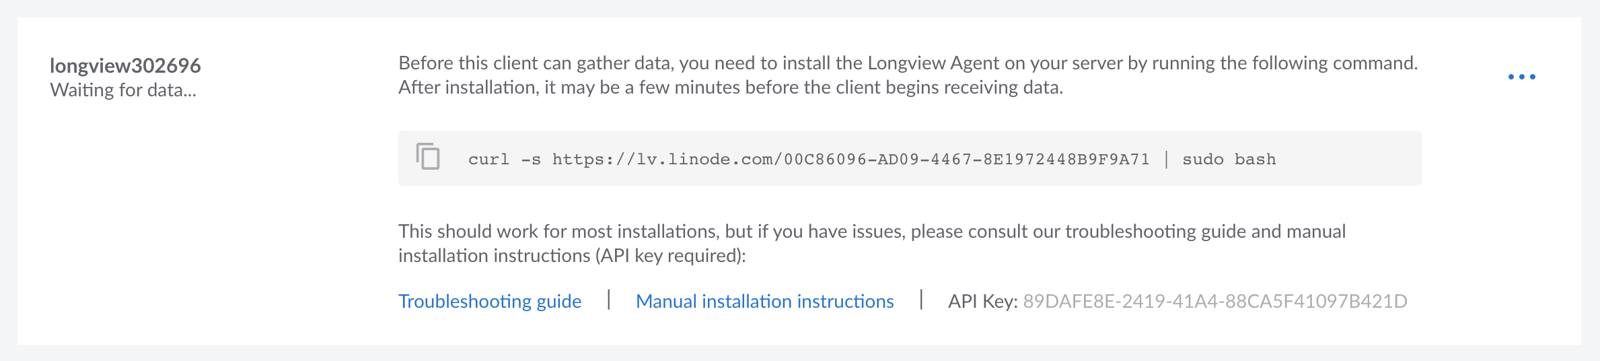 Screenshot of a new Longview client in the Cloud Manager